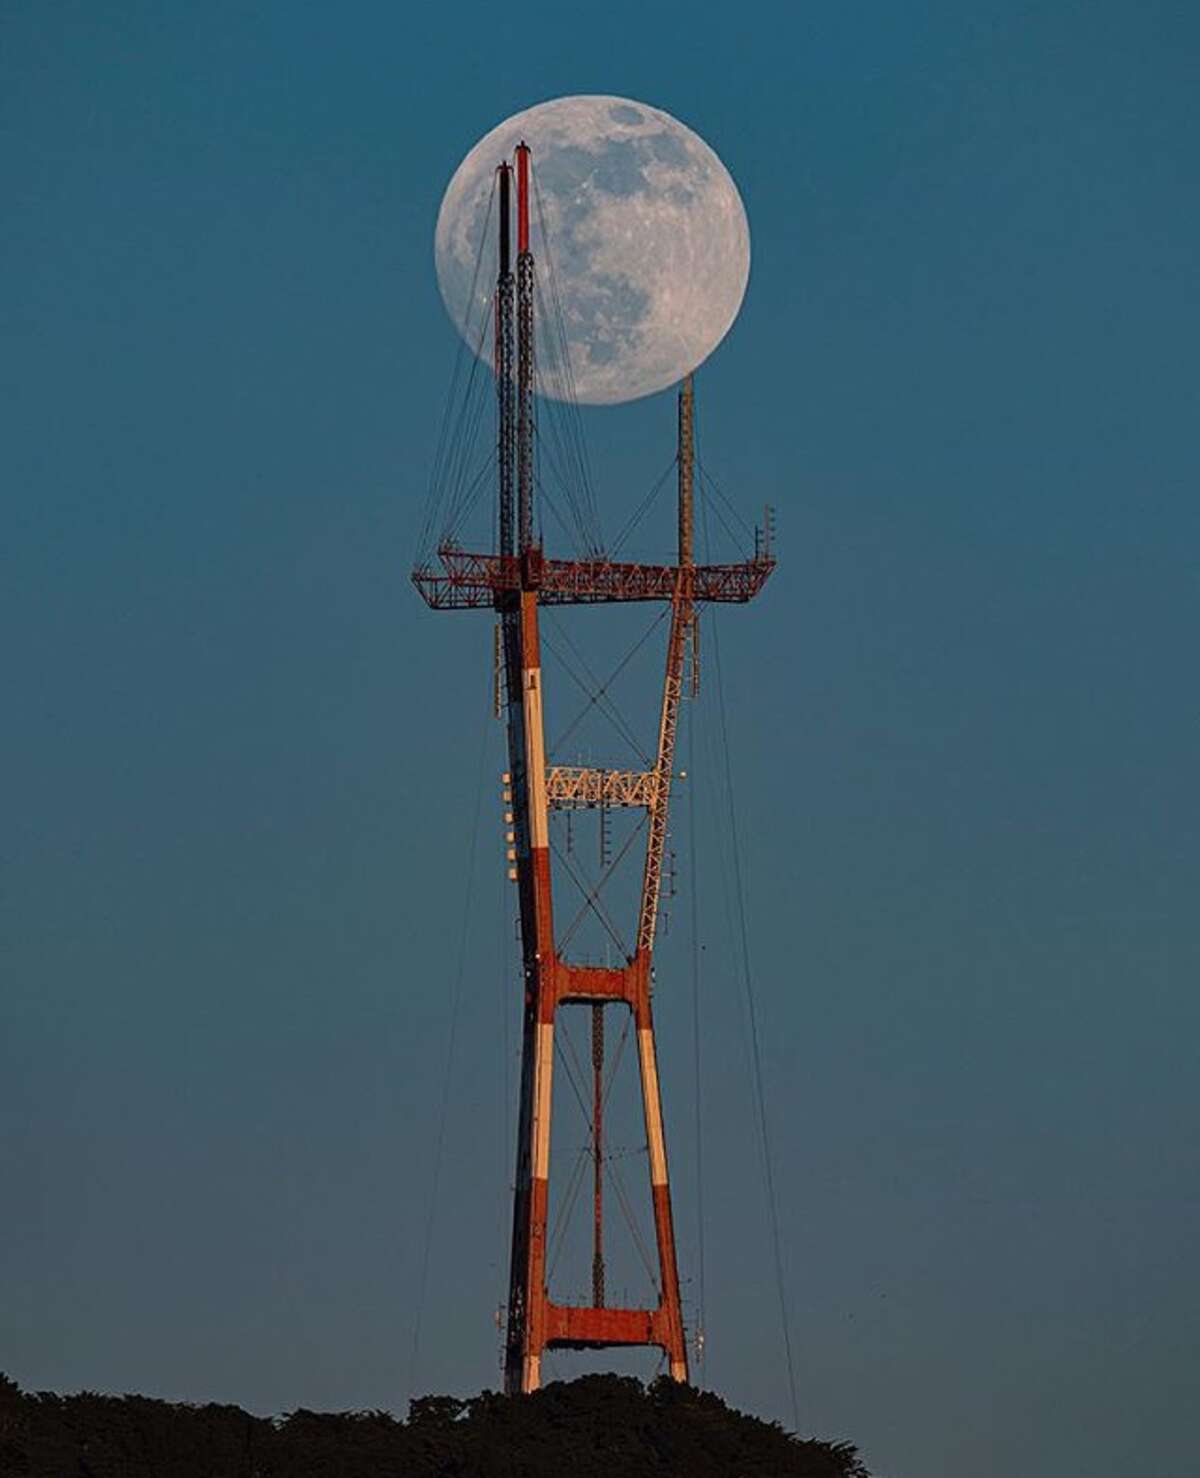 When one of the masts on the Sutro Tower was recently being repaired, @liewdesign composed this stunning photo of a full moon apparently passing through its structure.